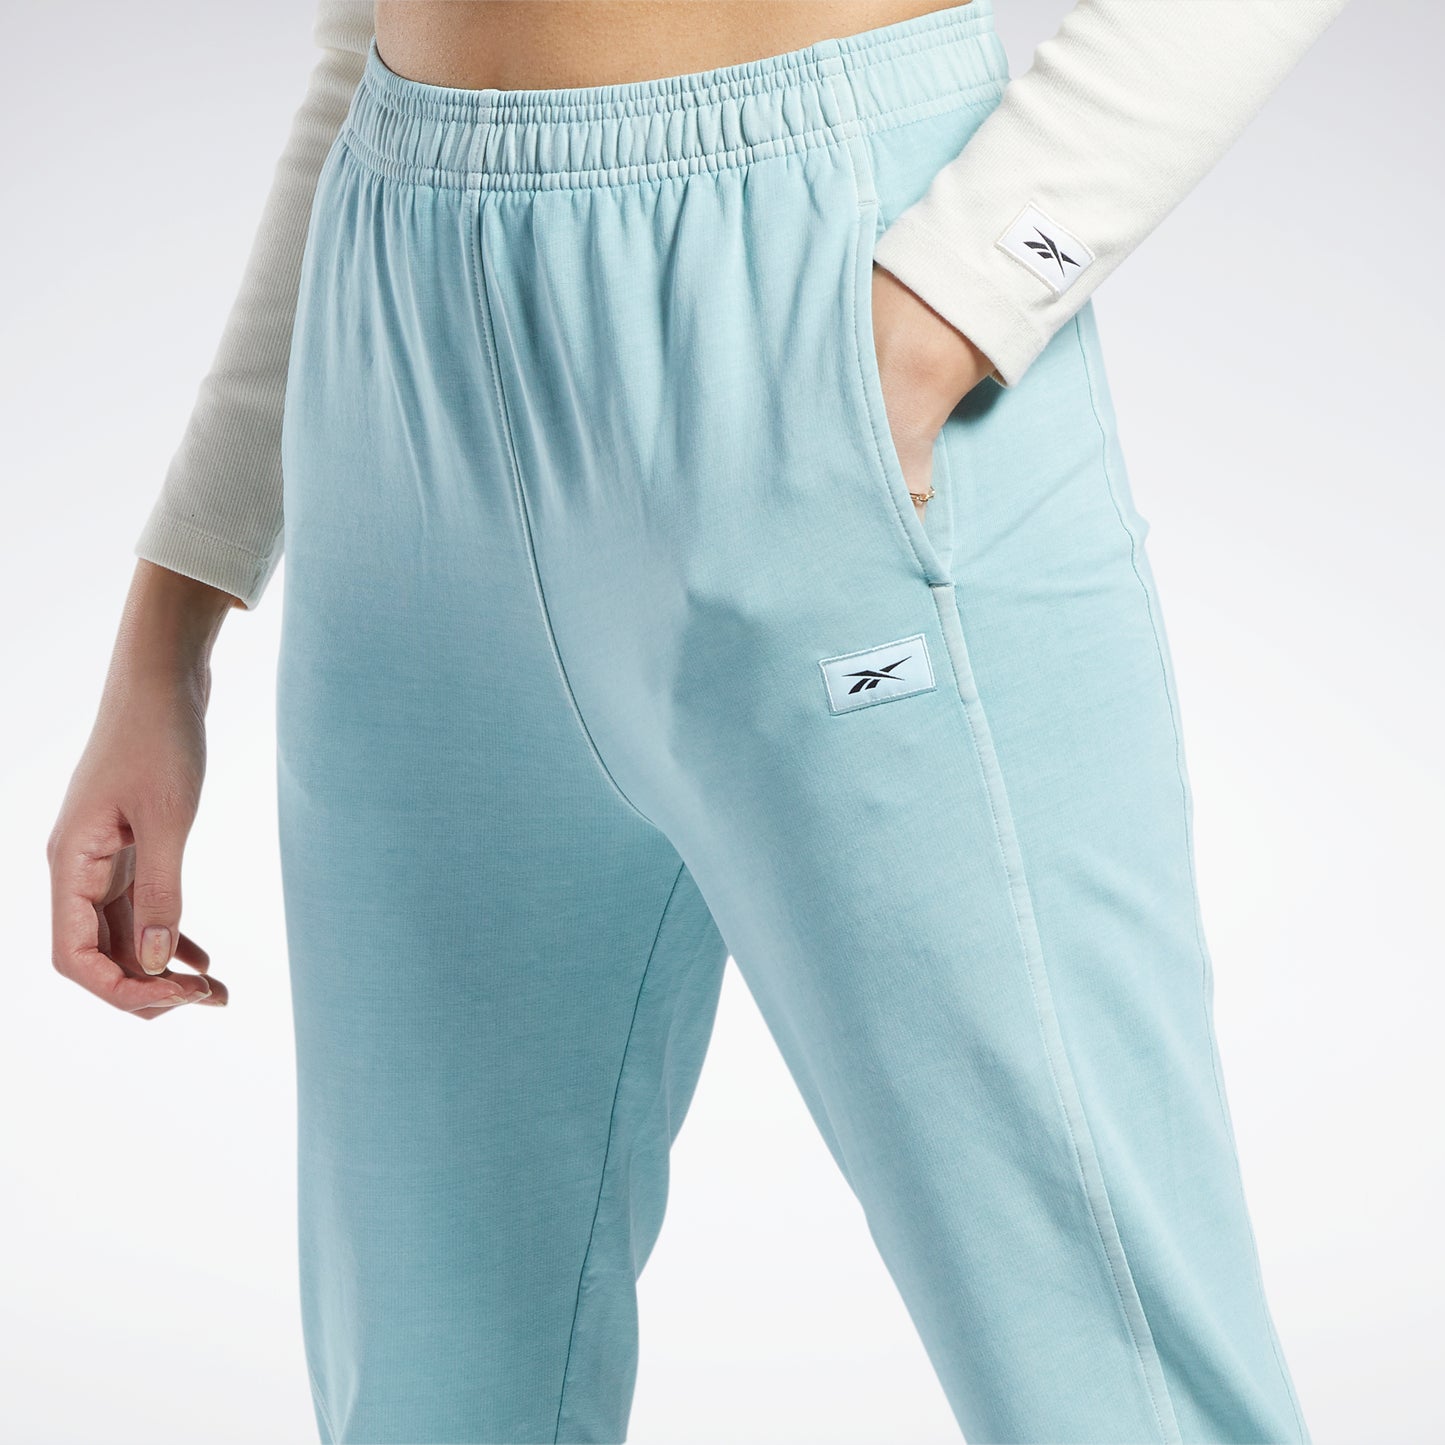 Reebok Classics Natural Dye Fitted Joggers - Women's